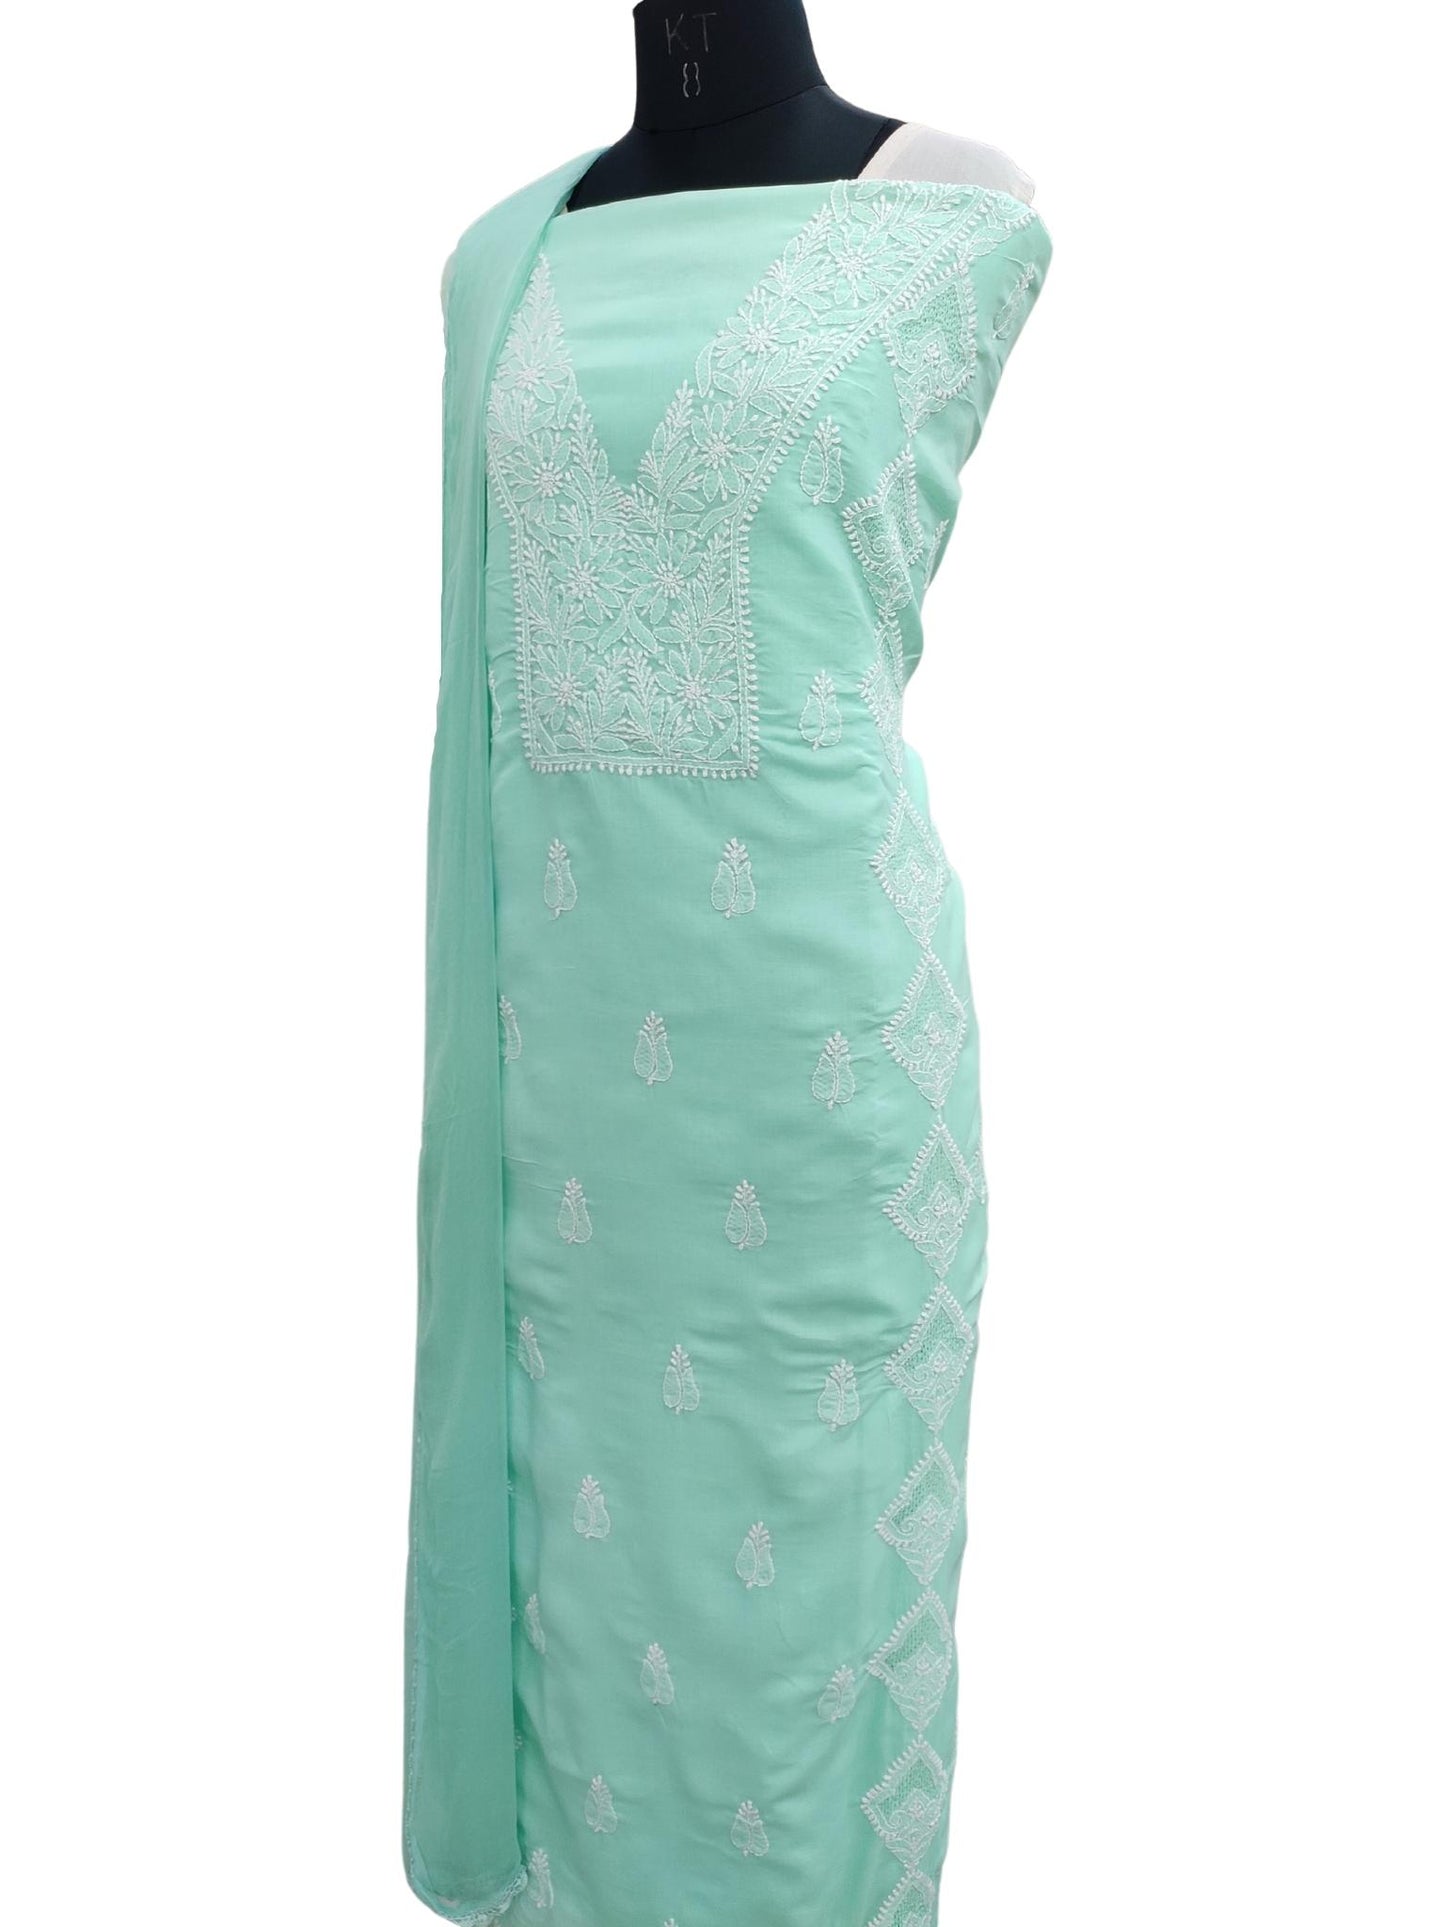 Shyamal Chikan Hand Embroidered Sea Green Cotton Lucknowi Chikankari Unstitched Suit Piece With Jaali Work - S19287